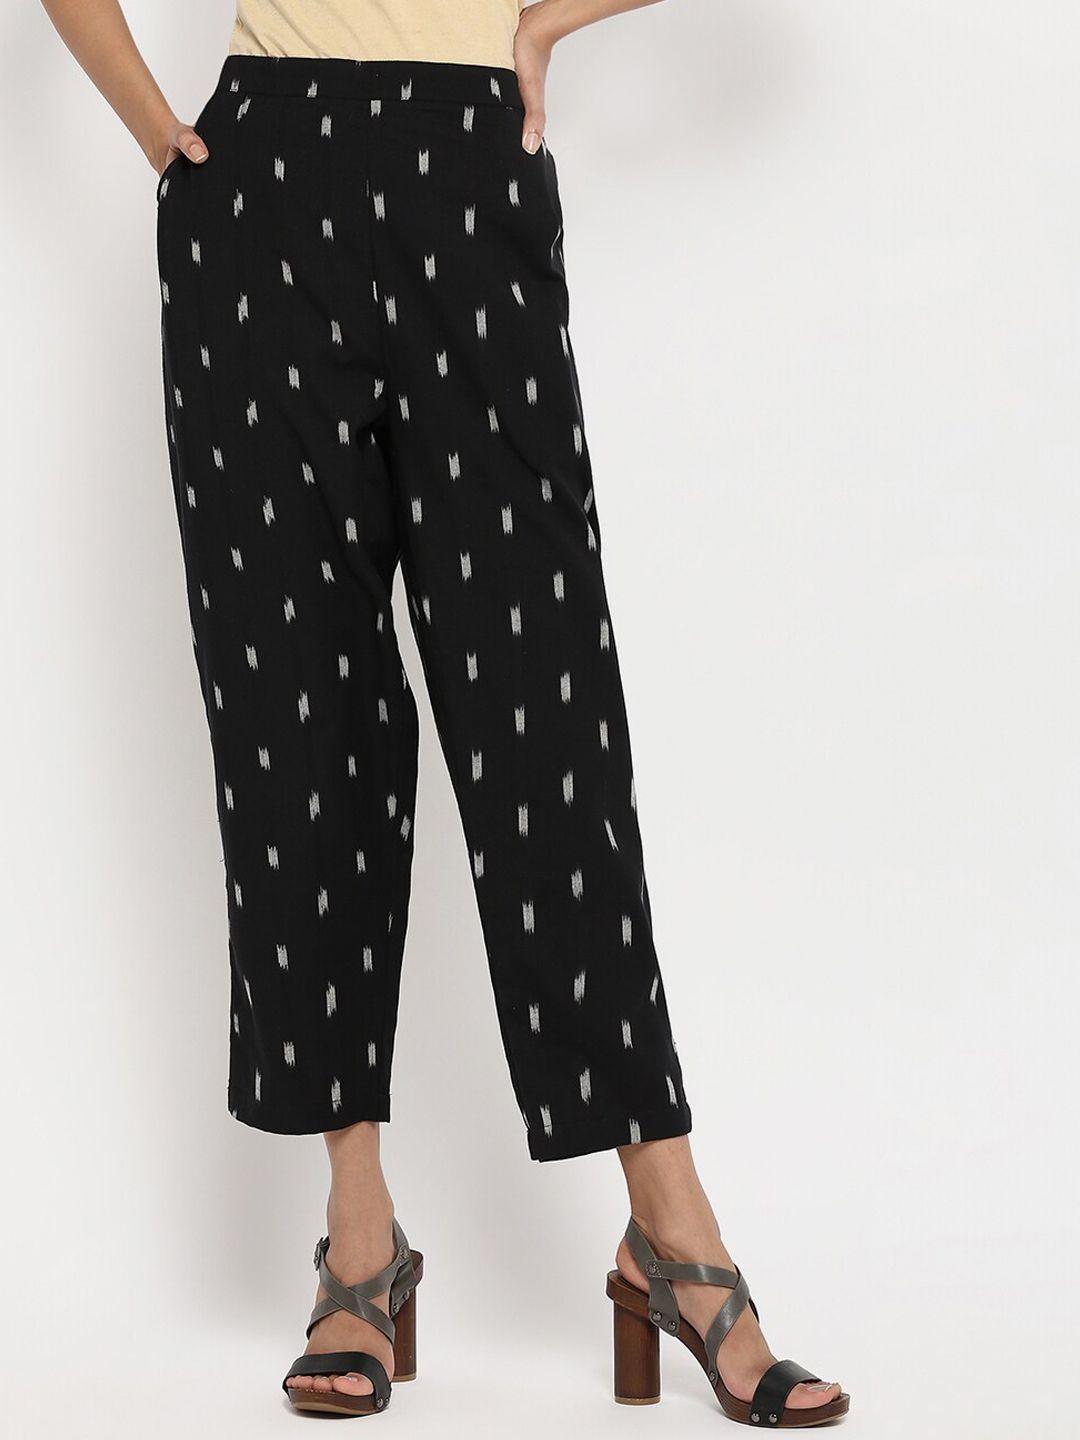 r&b women black relaxed culottes trousers